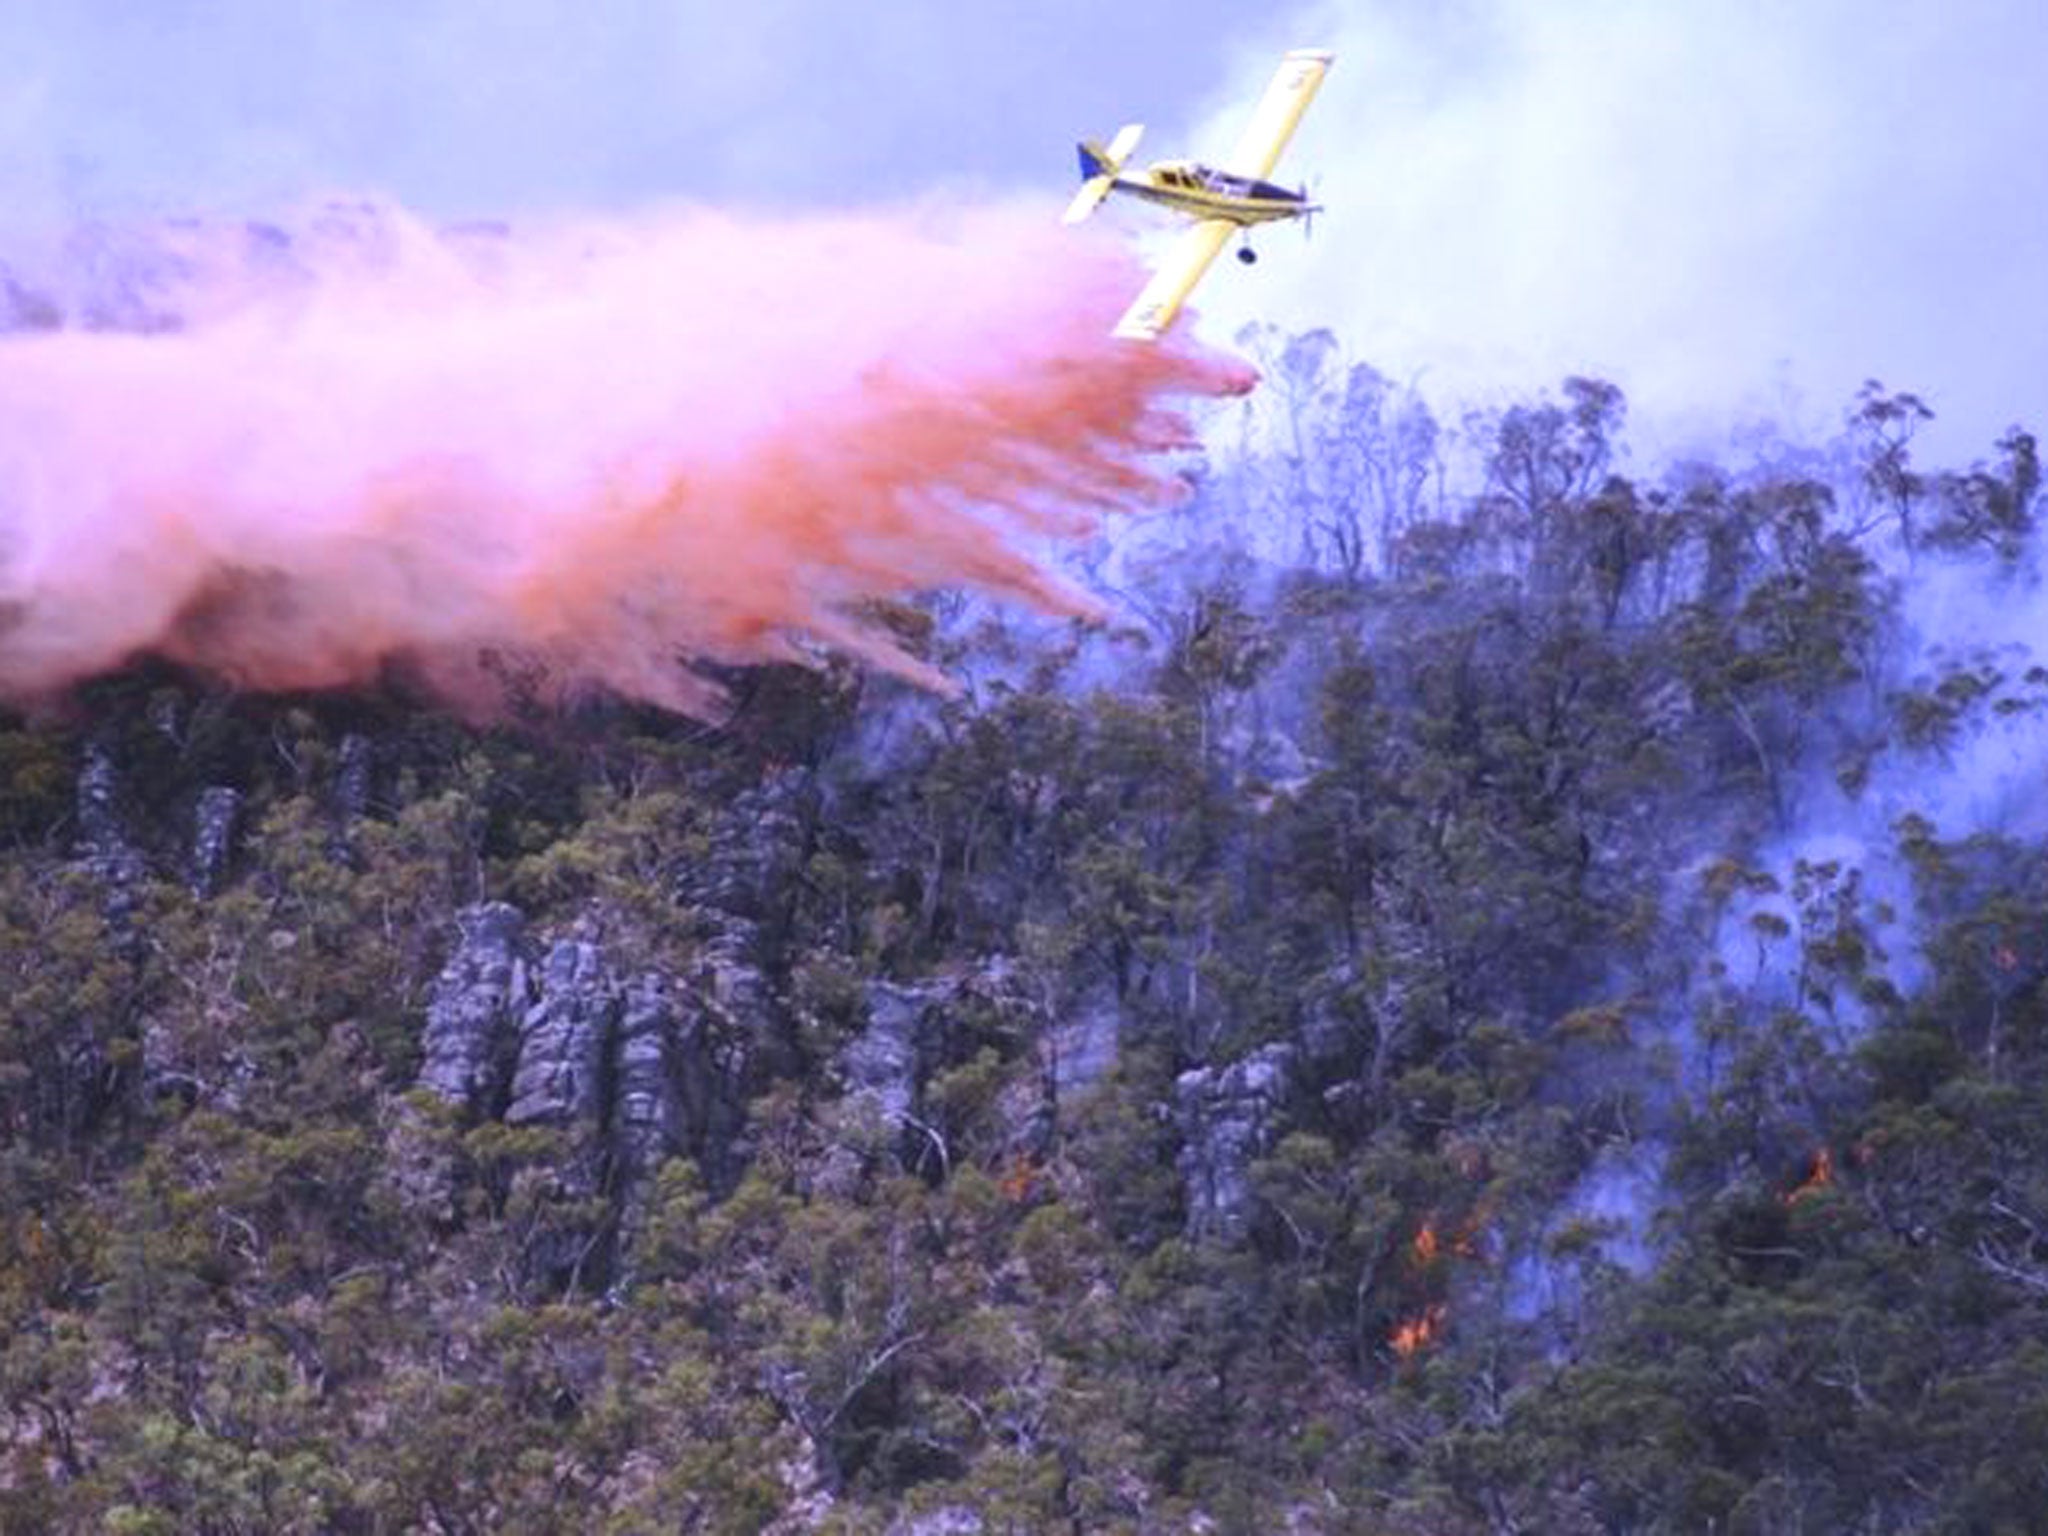 Fires burning throughout Victoria's Grampians region in South East Australia